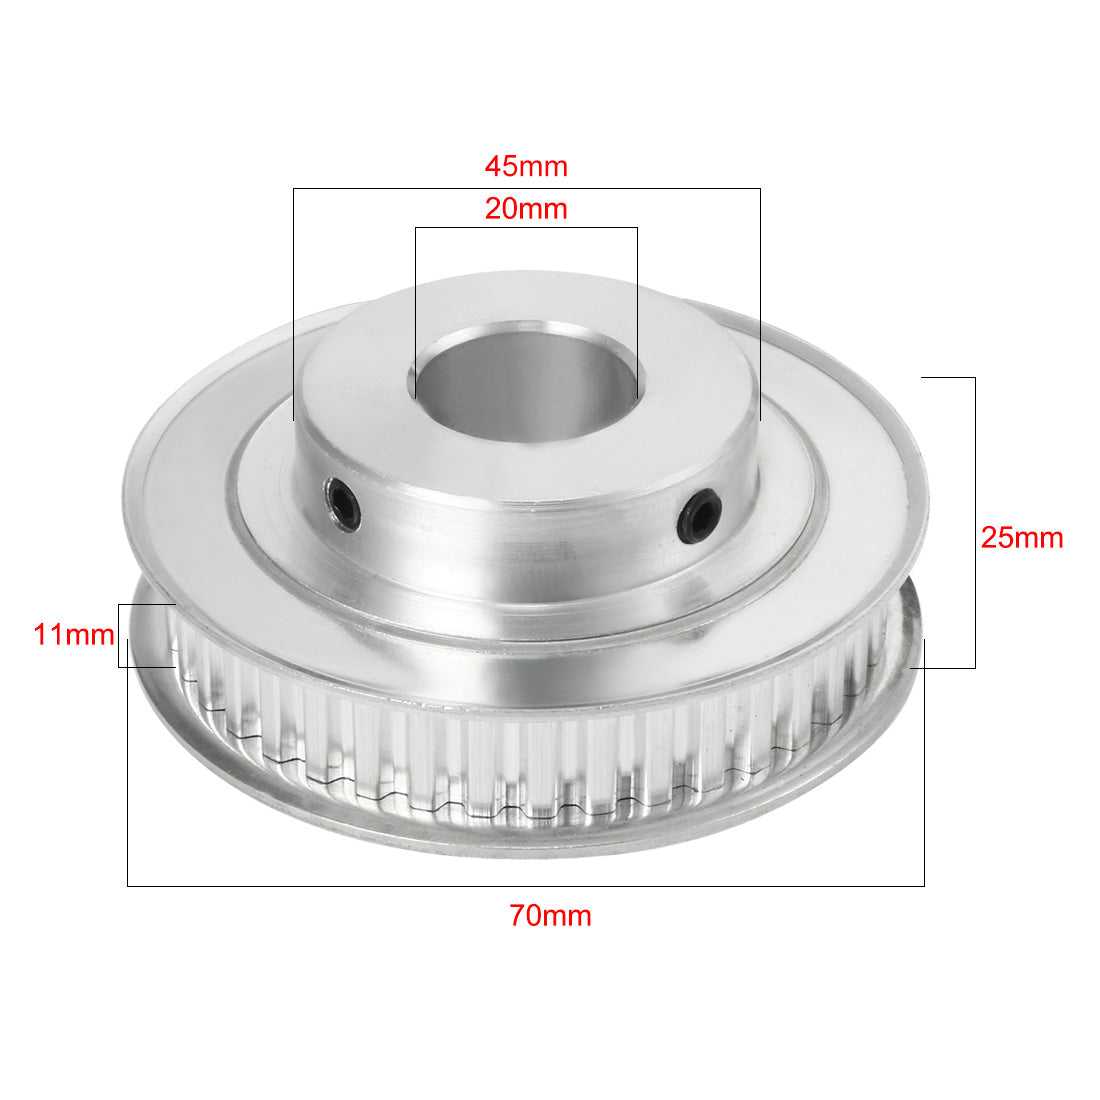 uxcell Uxcell Aluminum 40 Teeth 20mm Bore 5.08mm Pitch Timing Belt Pulley for 10mm Belt